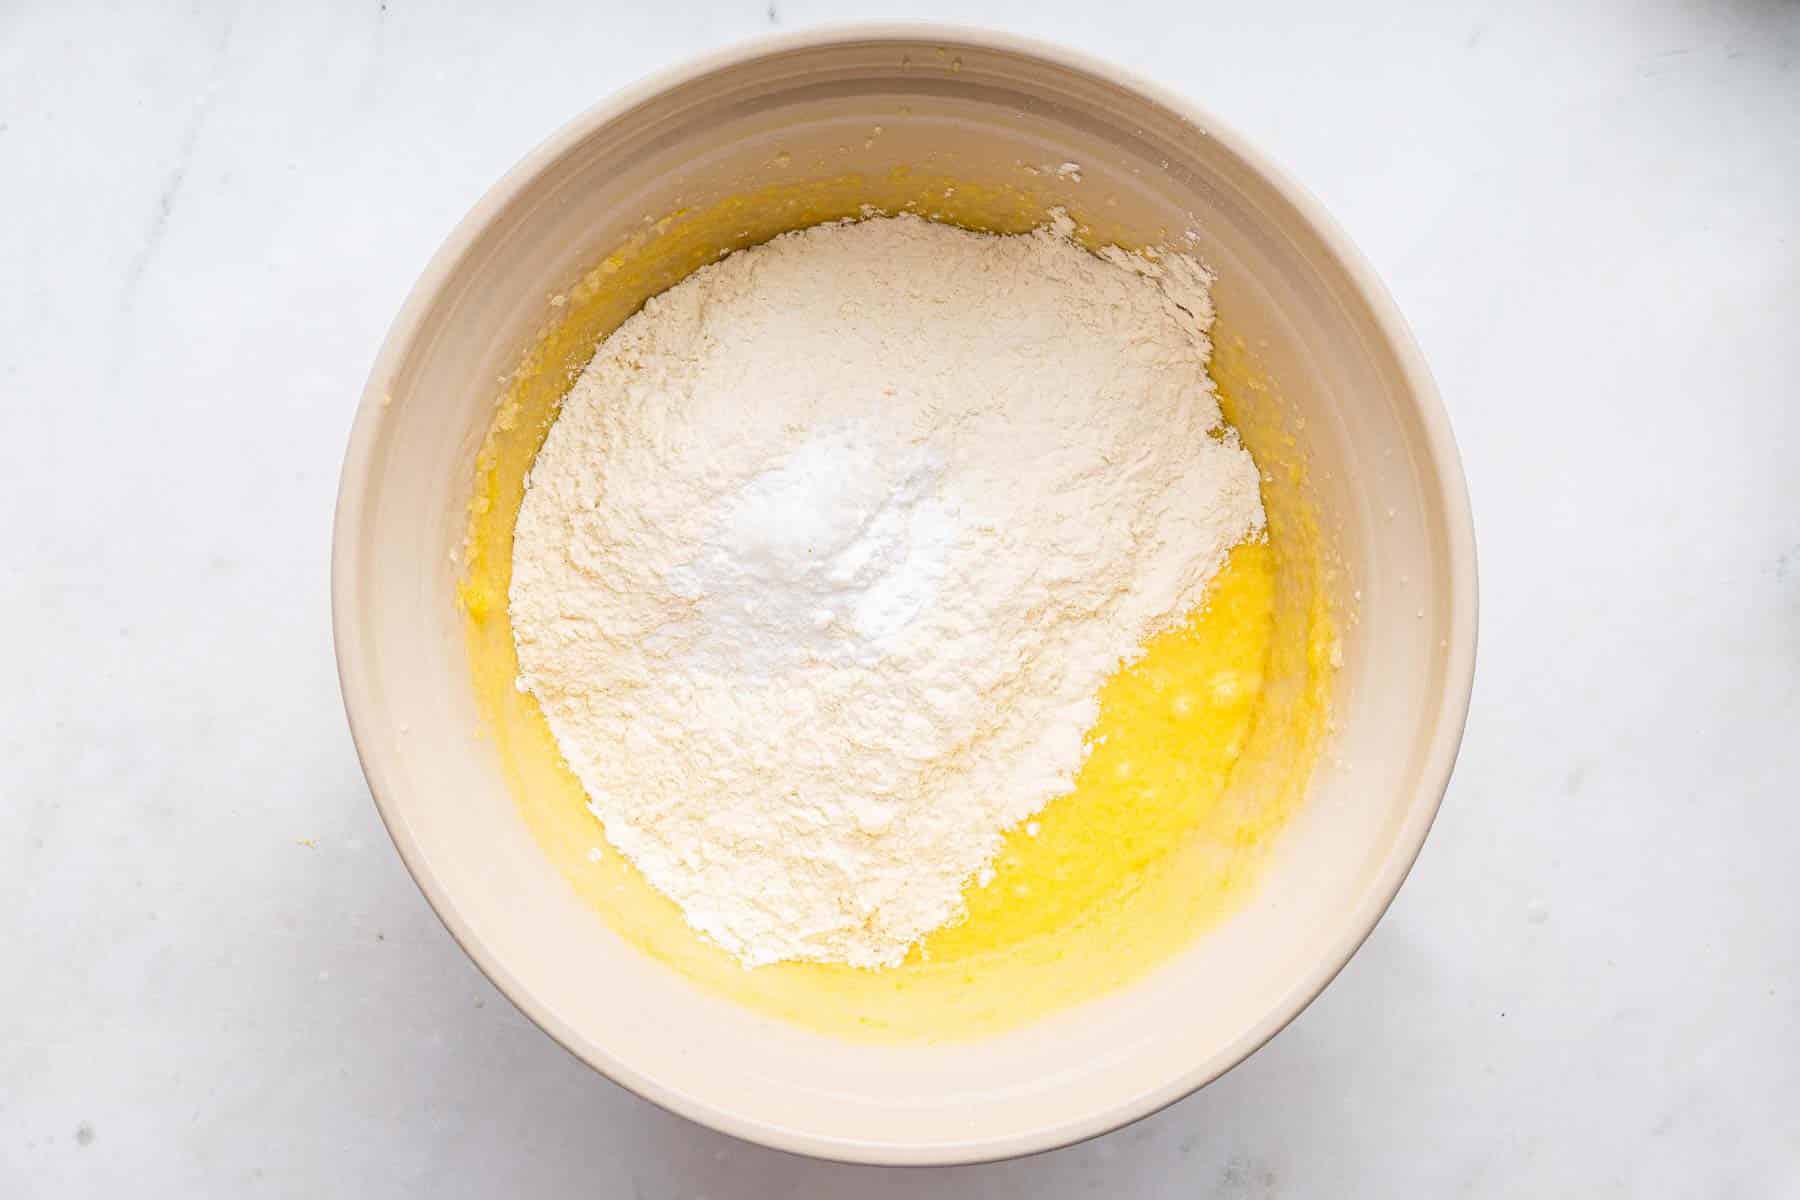 White flour on top of yellow batter in cream bowl on counter.